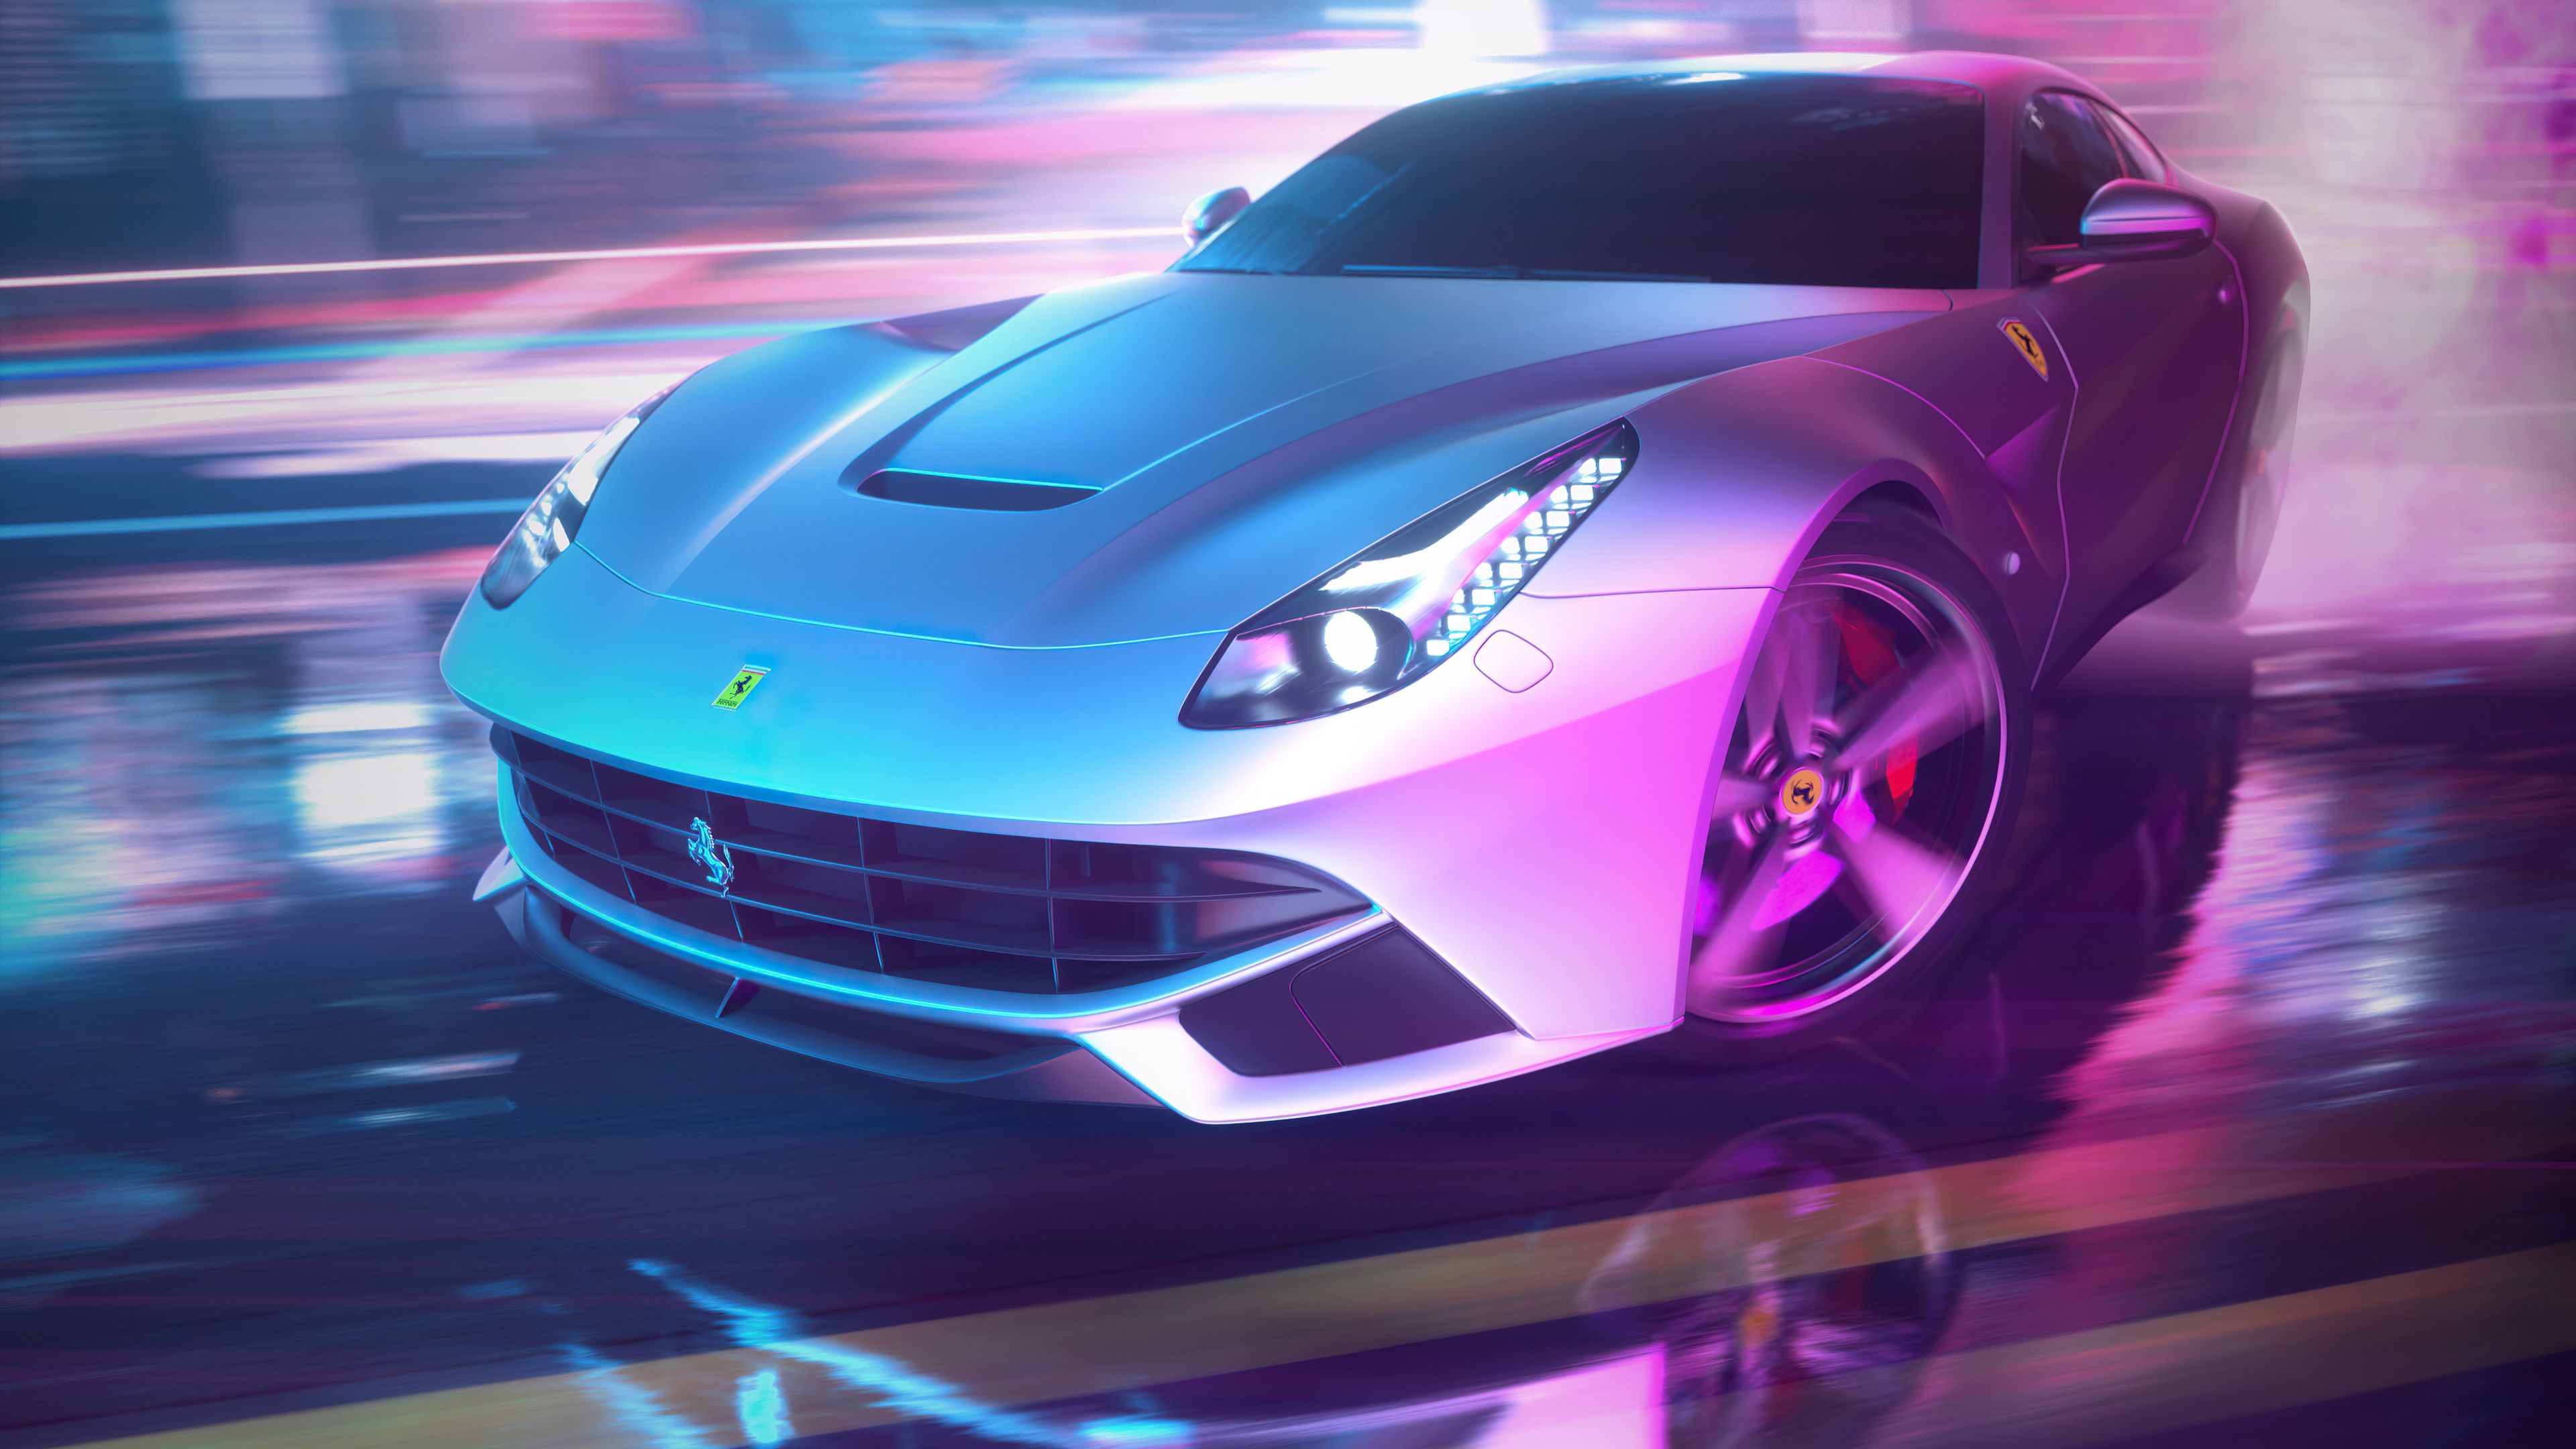 Drifting Ferrari Neon Streets 4k 2048x1152 Resolution HD 4k Wallpaper, Image, Background, Photo and Picture